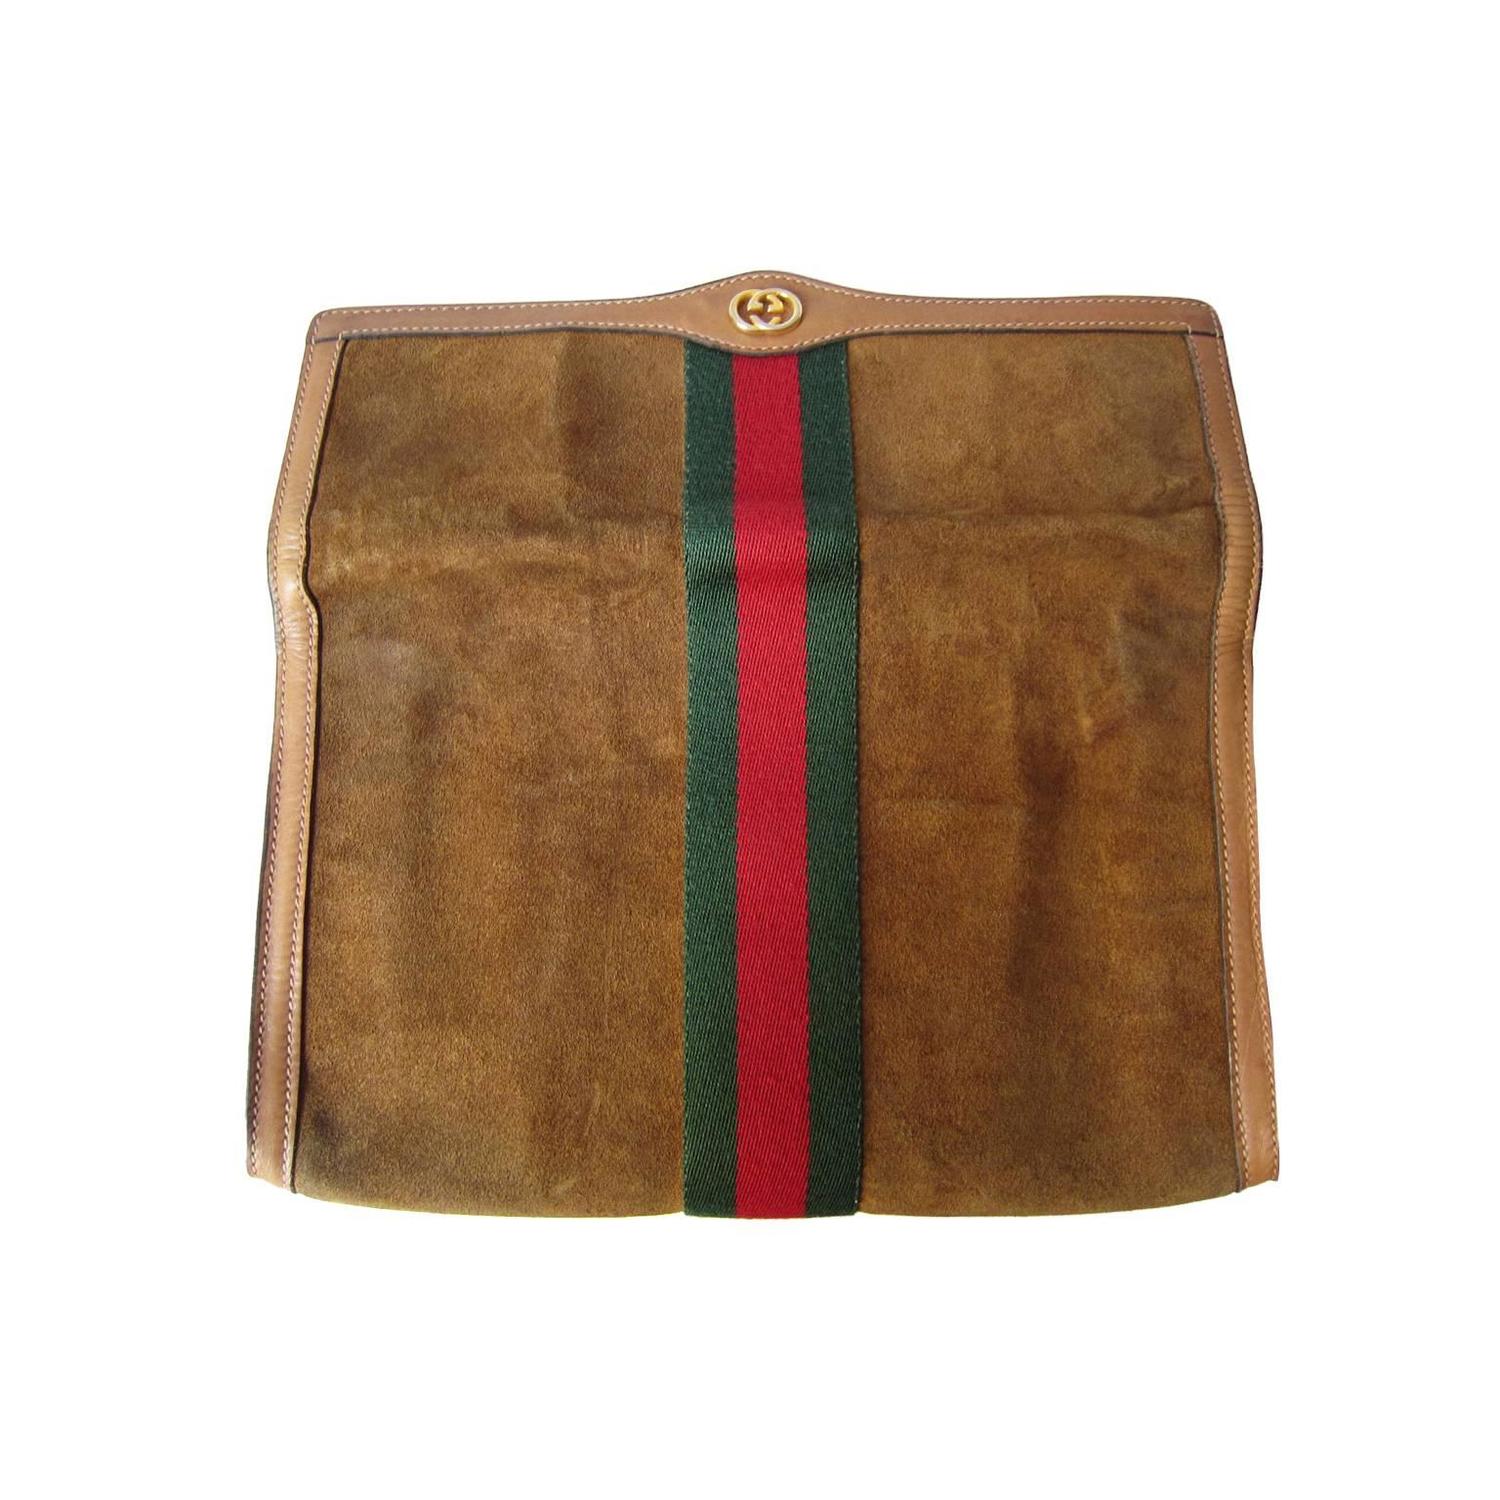 Gucci Classic Suede Clutch Bag 60s at 1stdibs